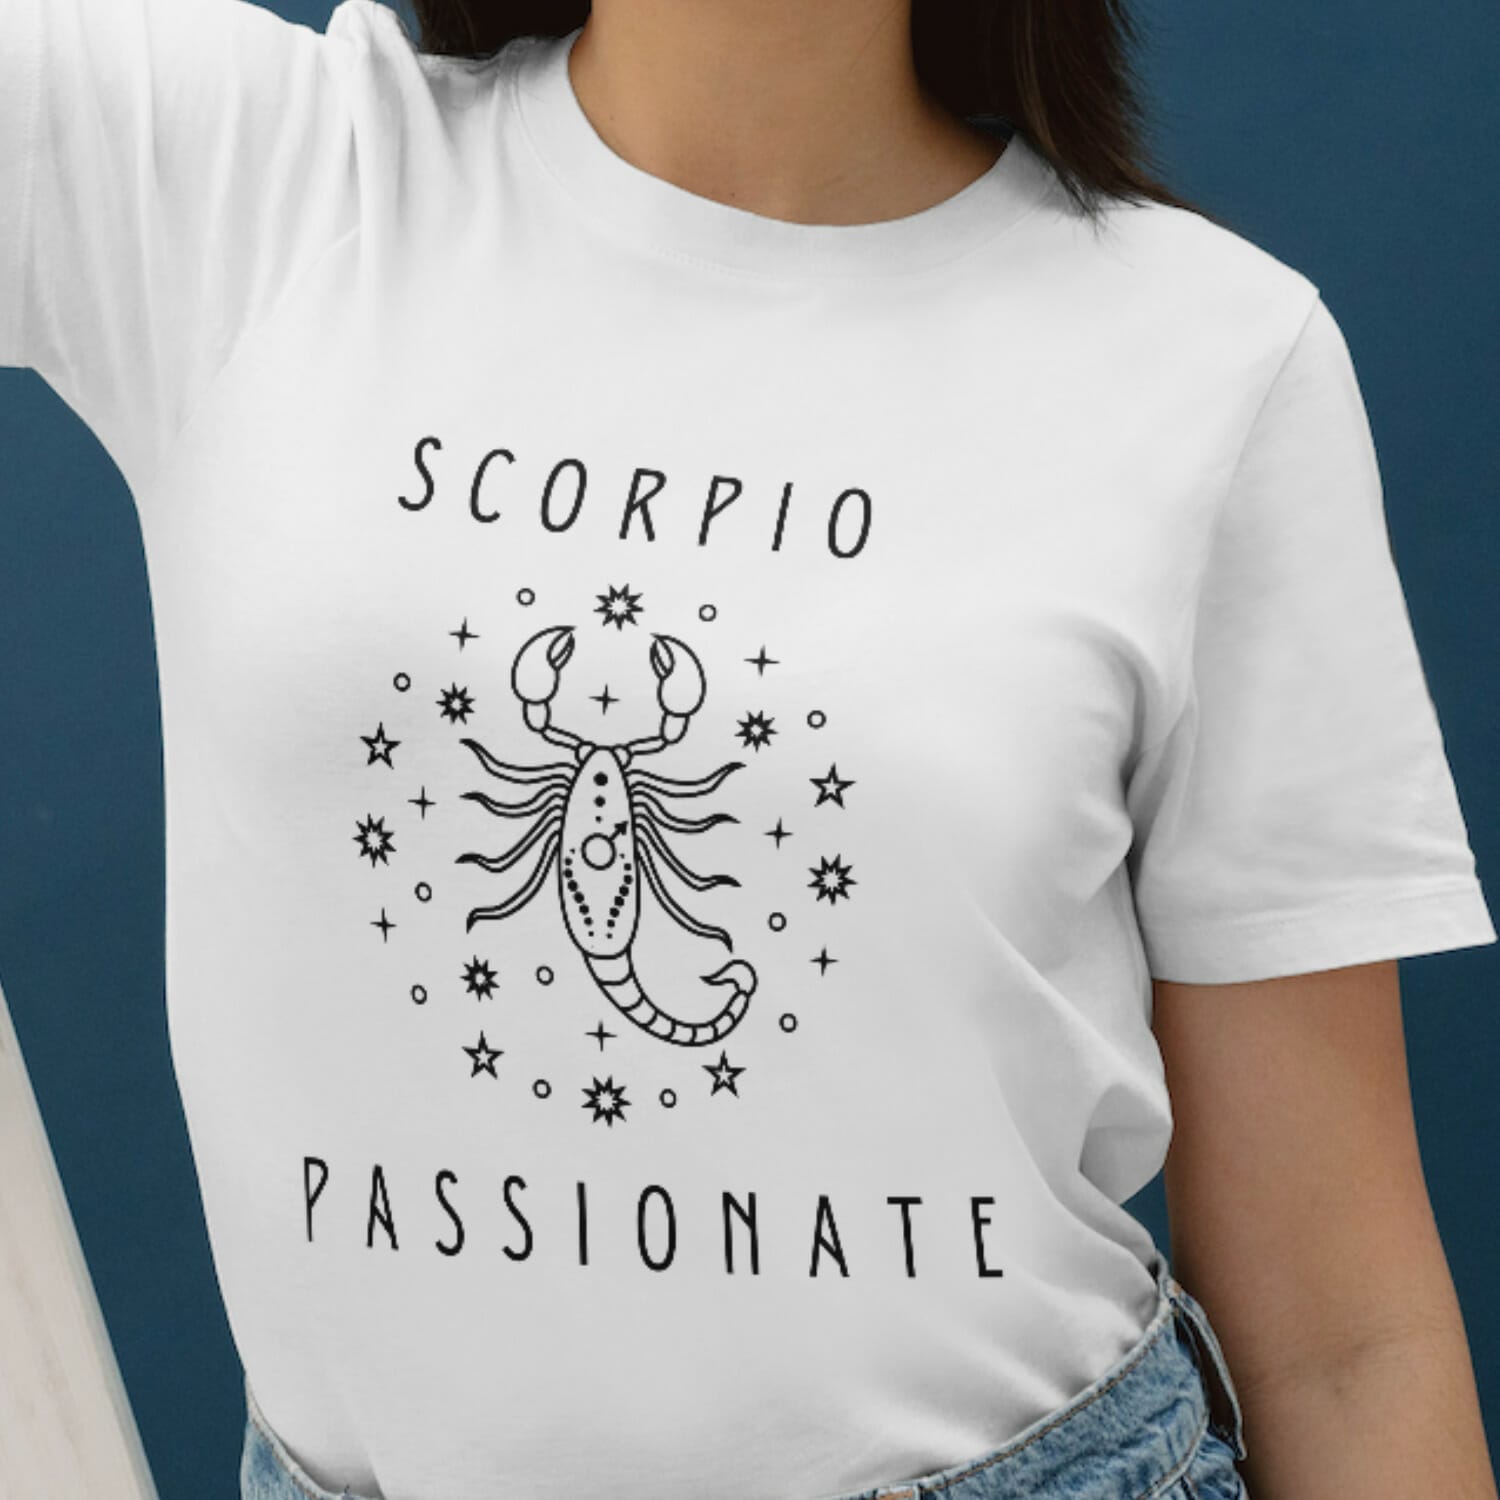 "Dive into the enigmatic world of Scorpio with our Boho Style Scorpio Zodiac T-shirt design. Explore the stars and style – go get yours today!"